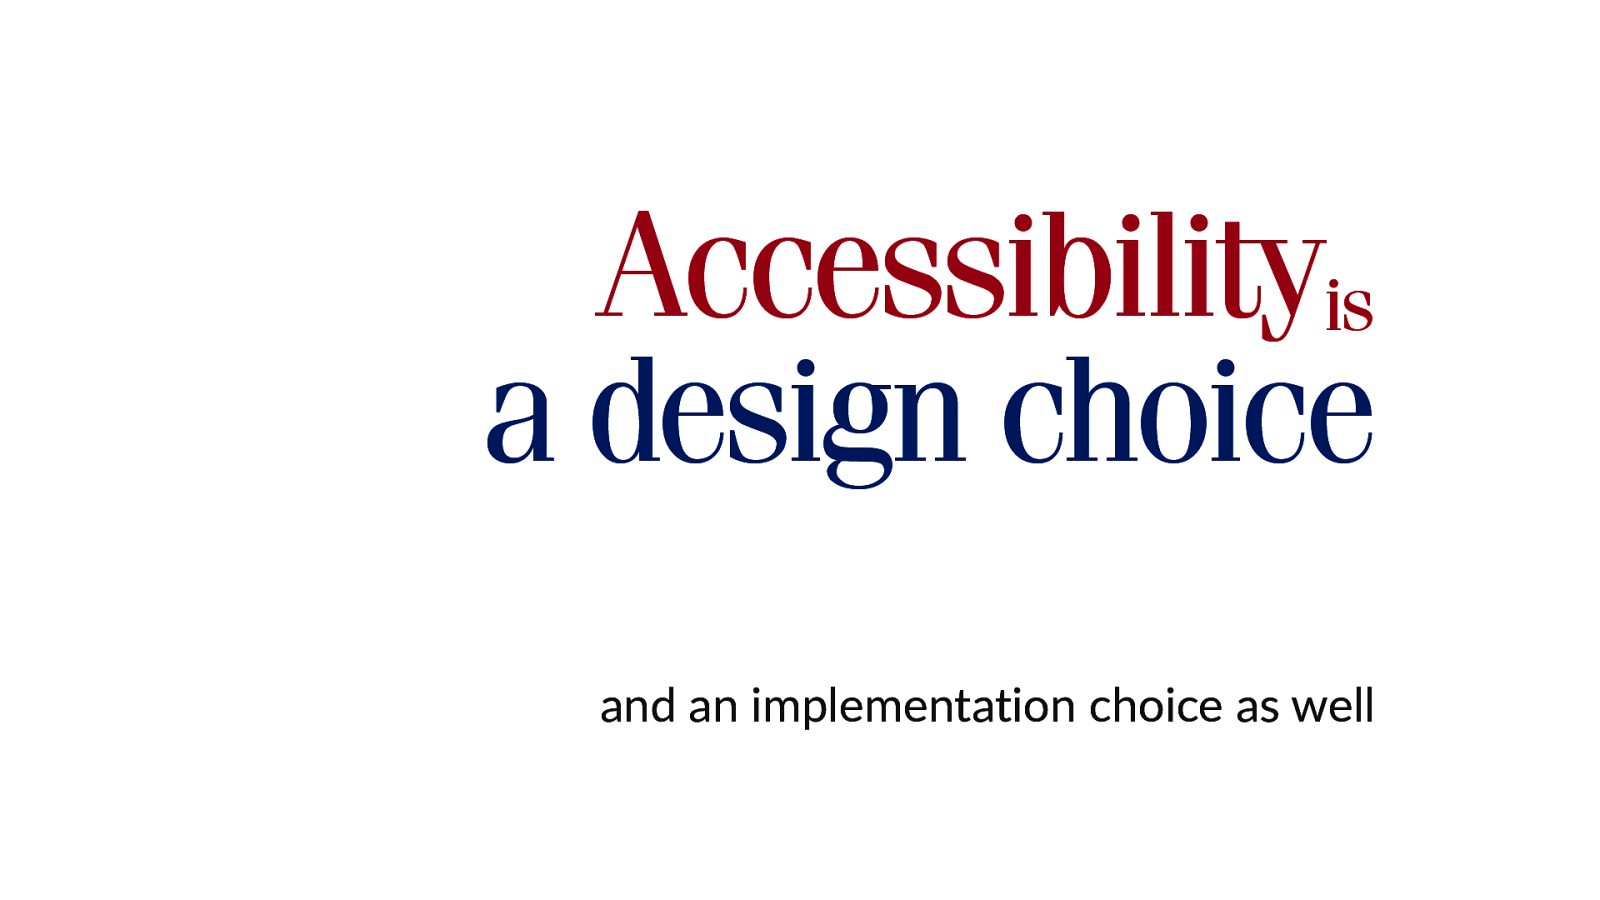 Accessibility is a design choice